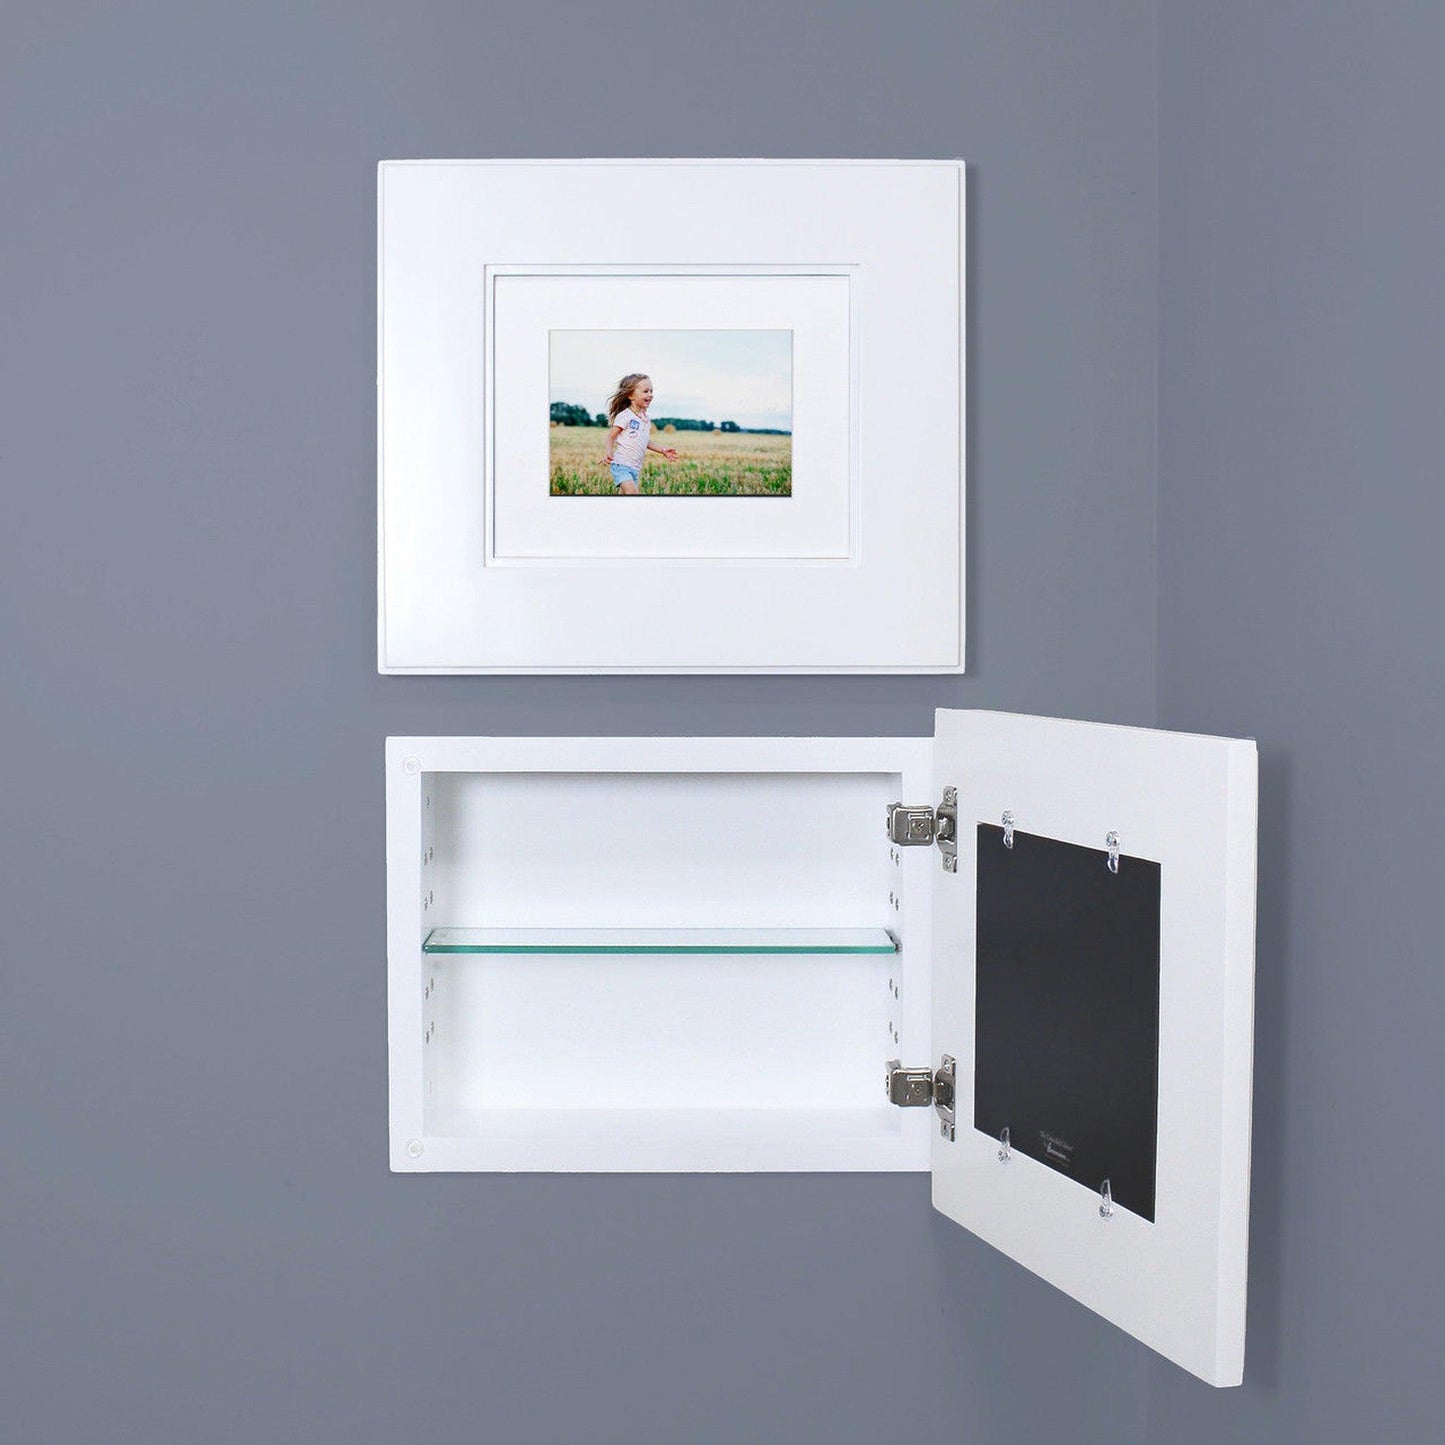 Fox Hollow Furnishings 14" x 11" White Compact Landscape Shaker Special 3" Depth Recessed Picture Frame Medicine Cabinet With Mirror and Ivory Matting